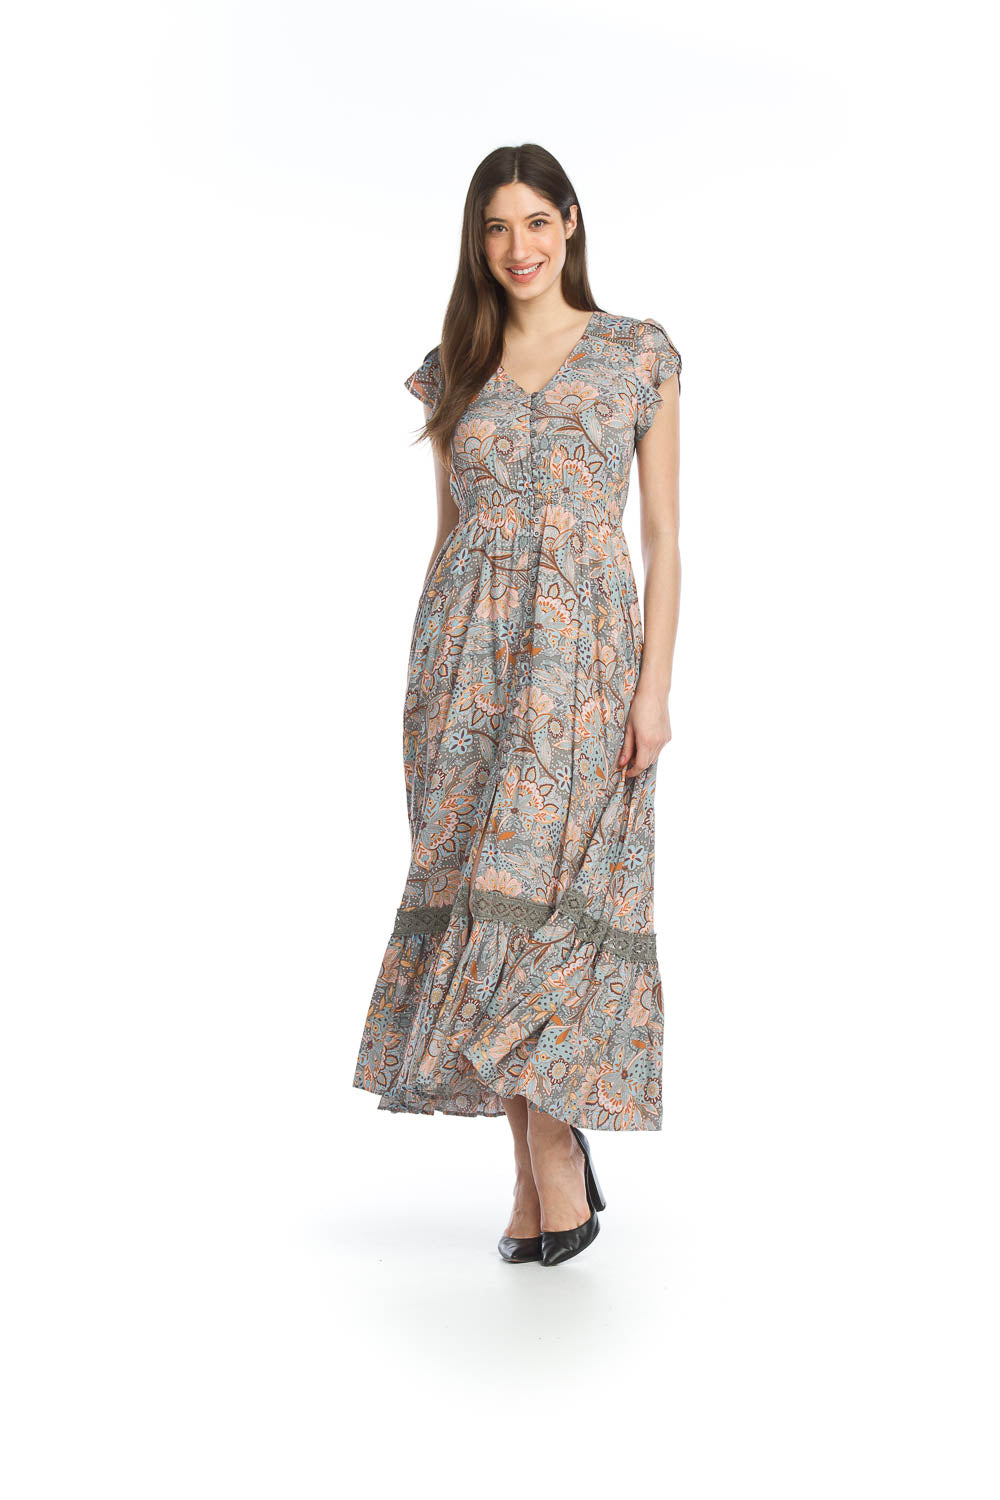 PD-14511 - FLORAL AND PAISLEY BUTTON FRONT MAXI DRESS